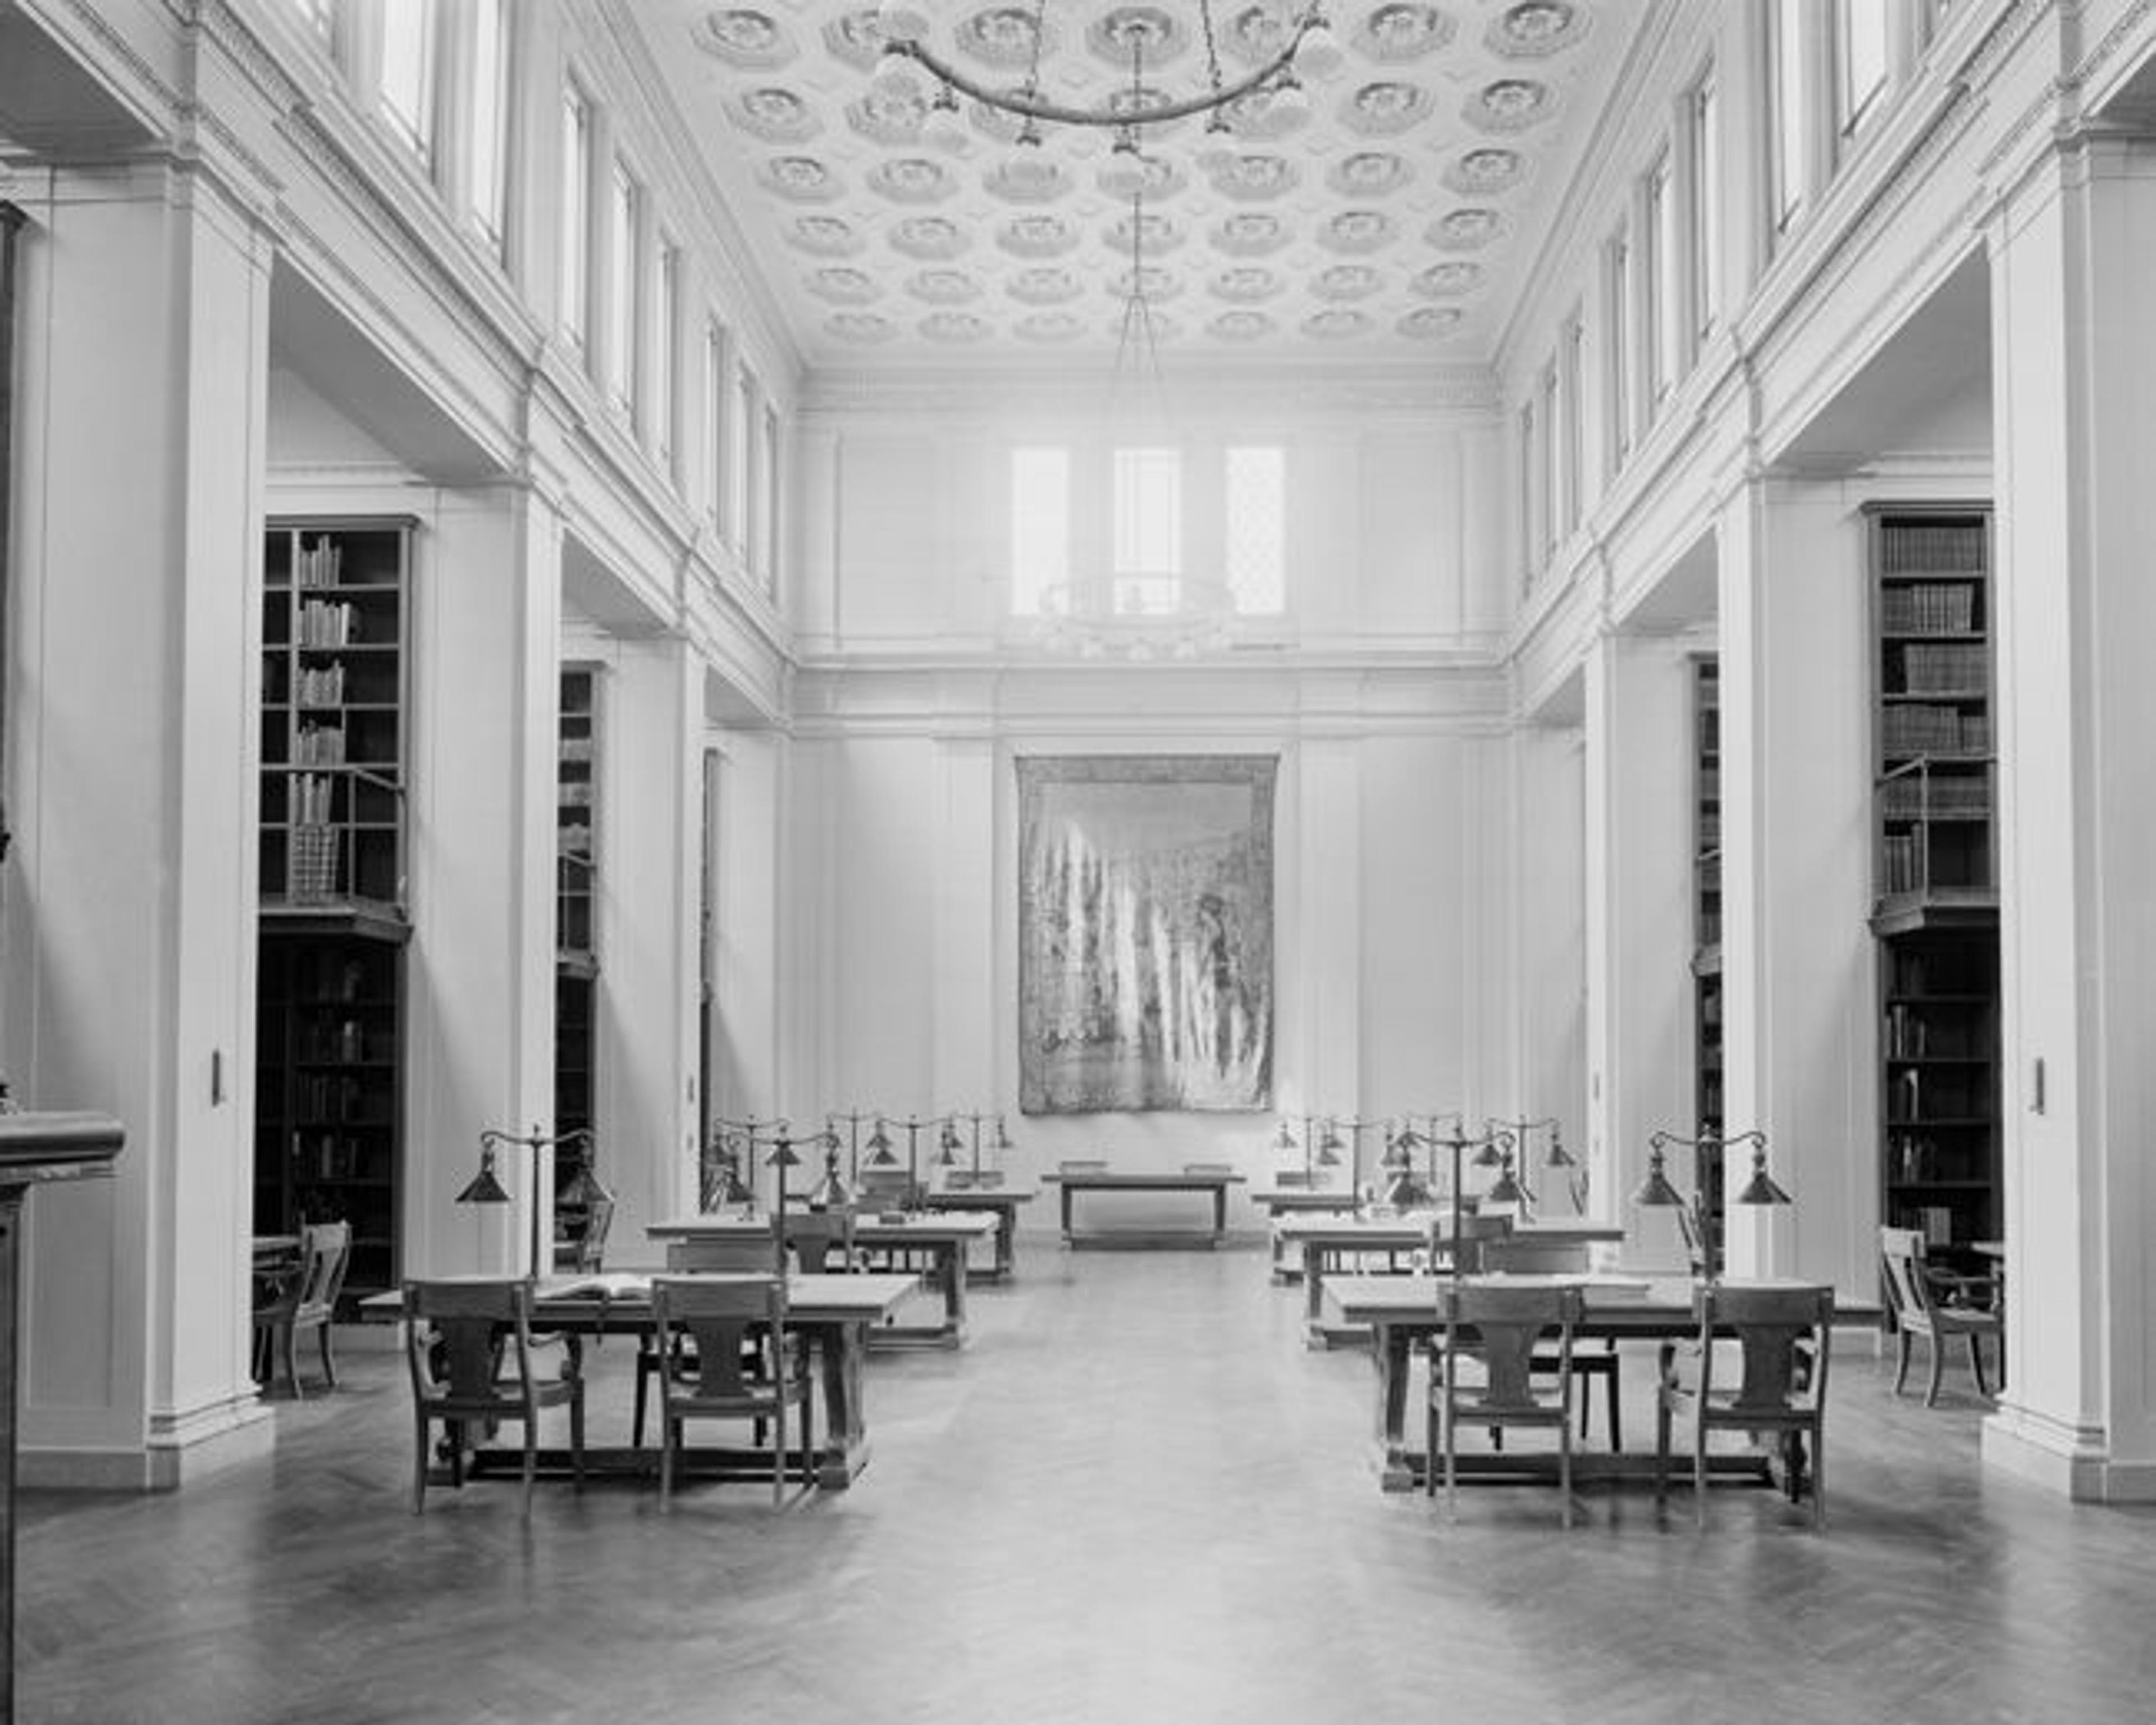 The Metropolitan Museum of Art, Wing G, First Floor, Library: Main Reading Room; View facing south. Photographed 1910. © The Metropolitan Museum of Art